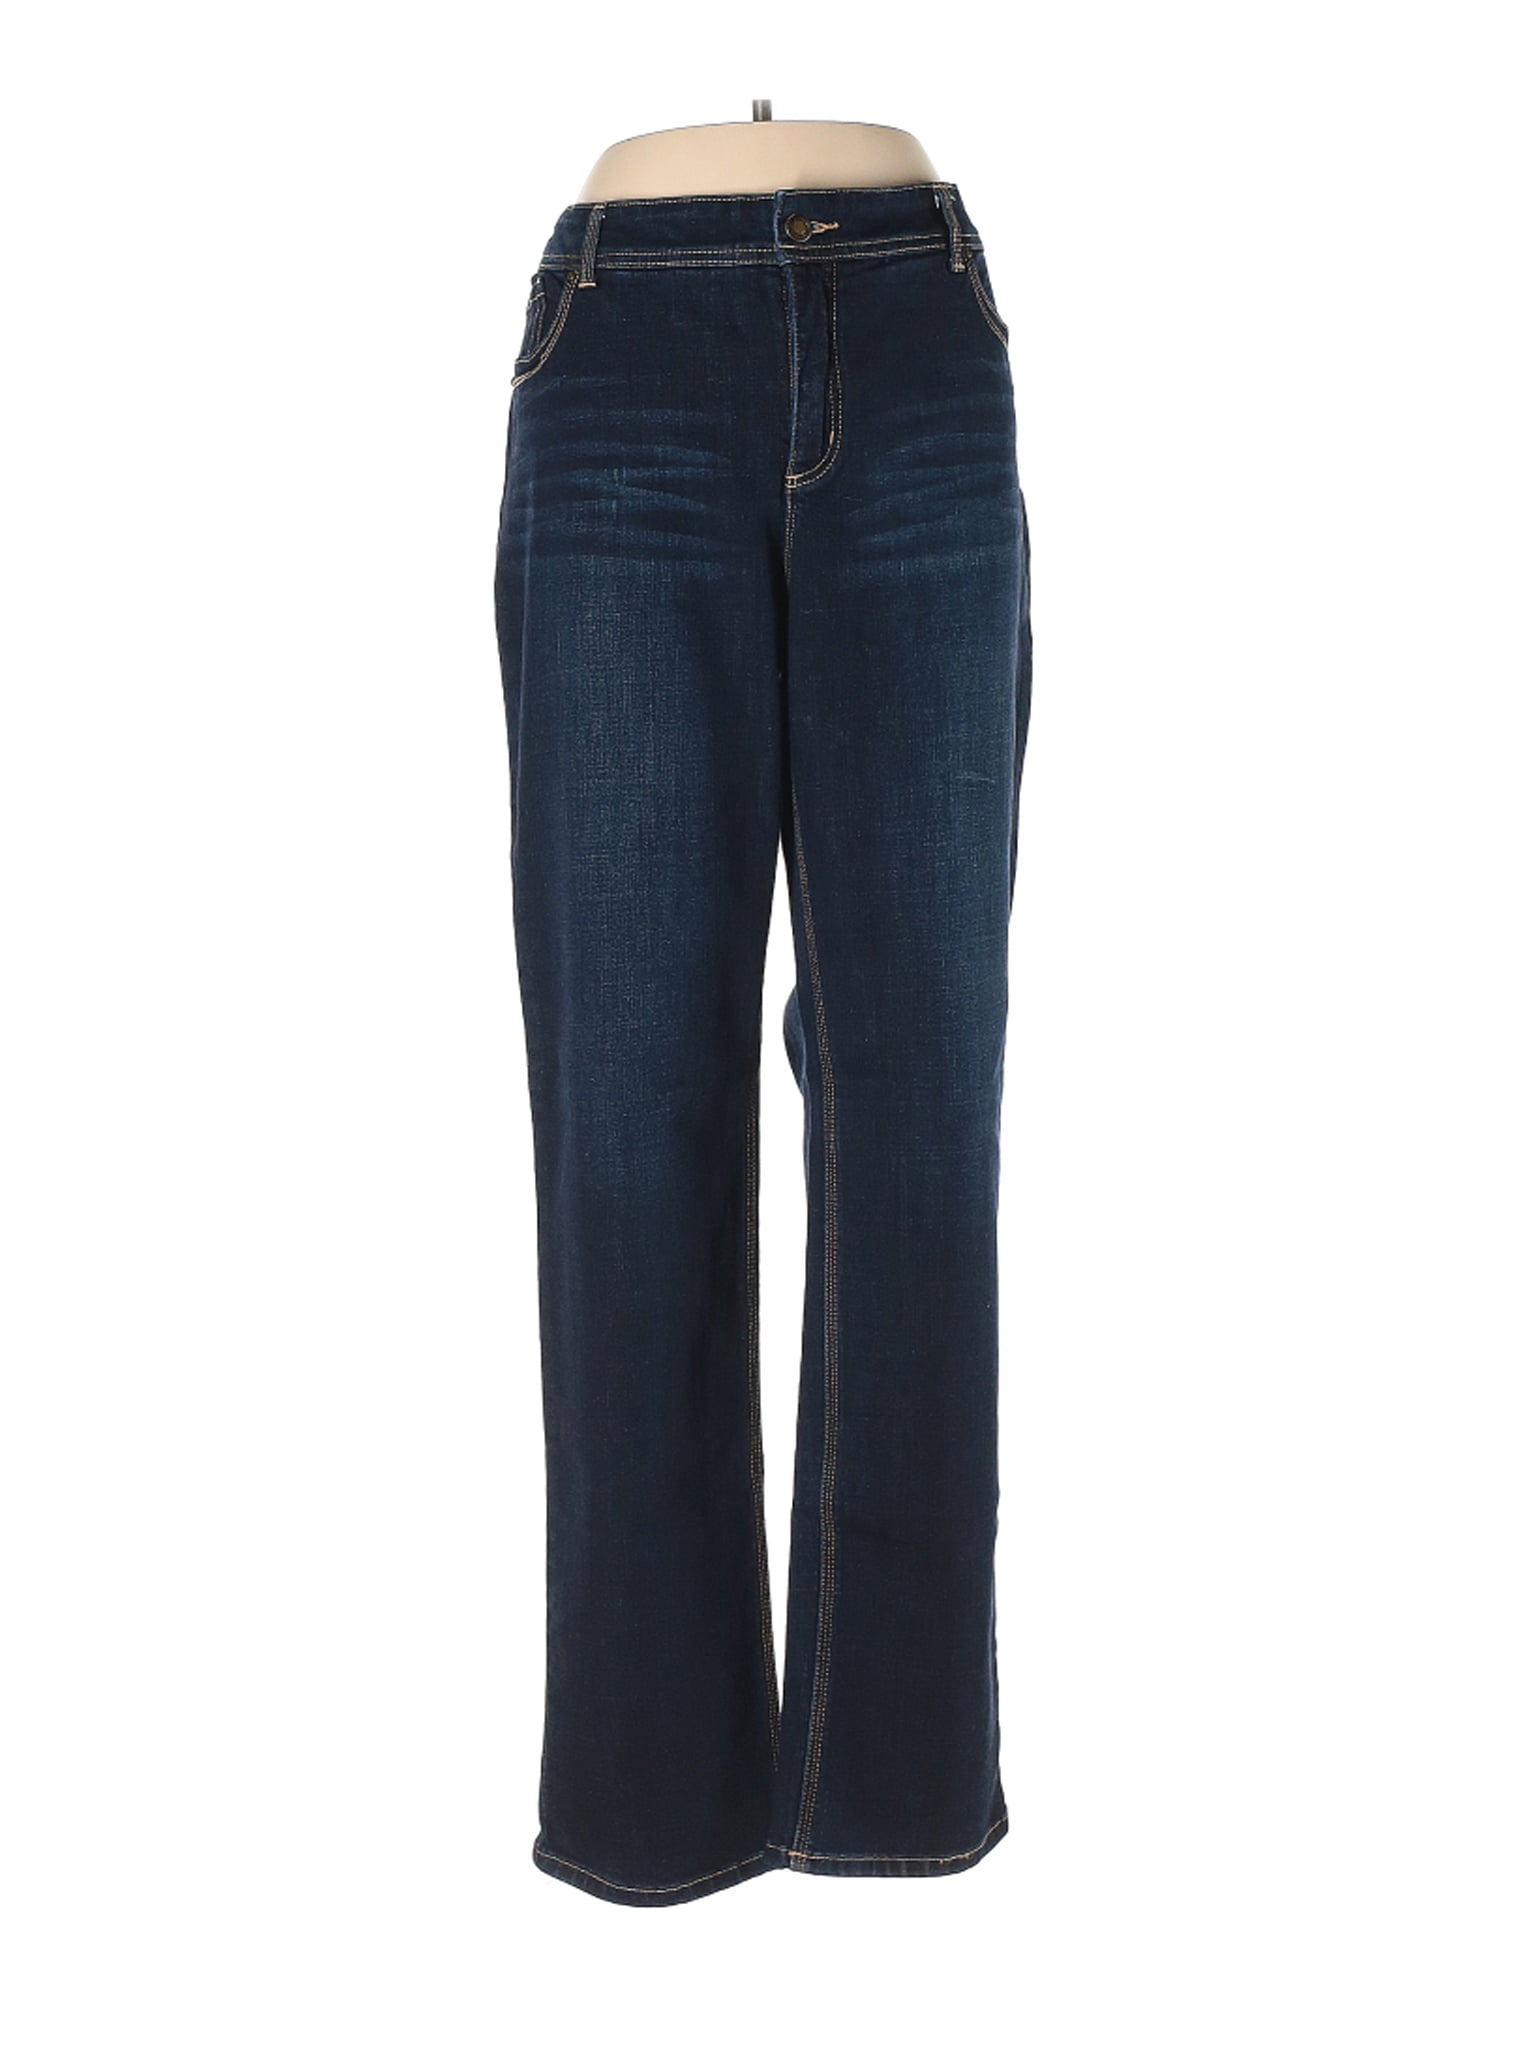 Chico's - Pre-Owned Chico's Women's Size L Jeans - Walmart.com ...